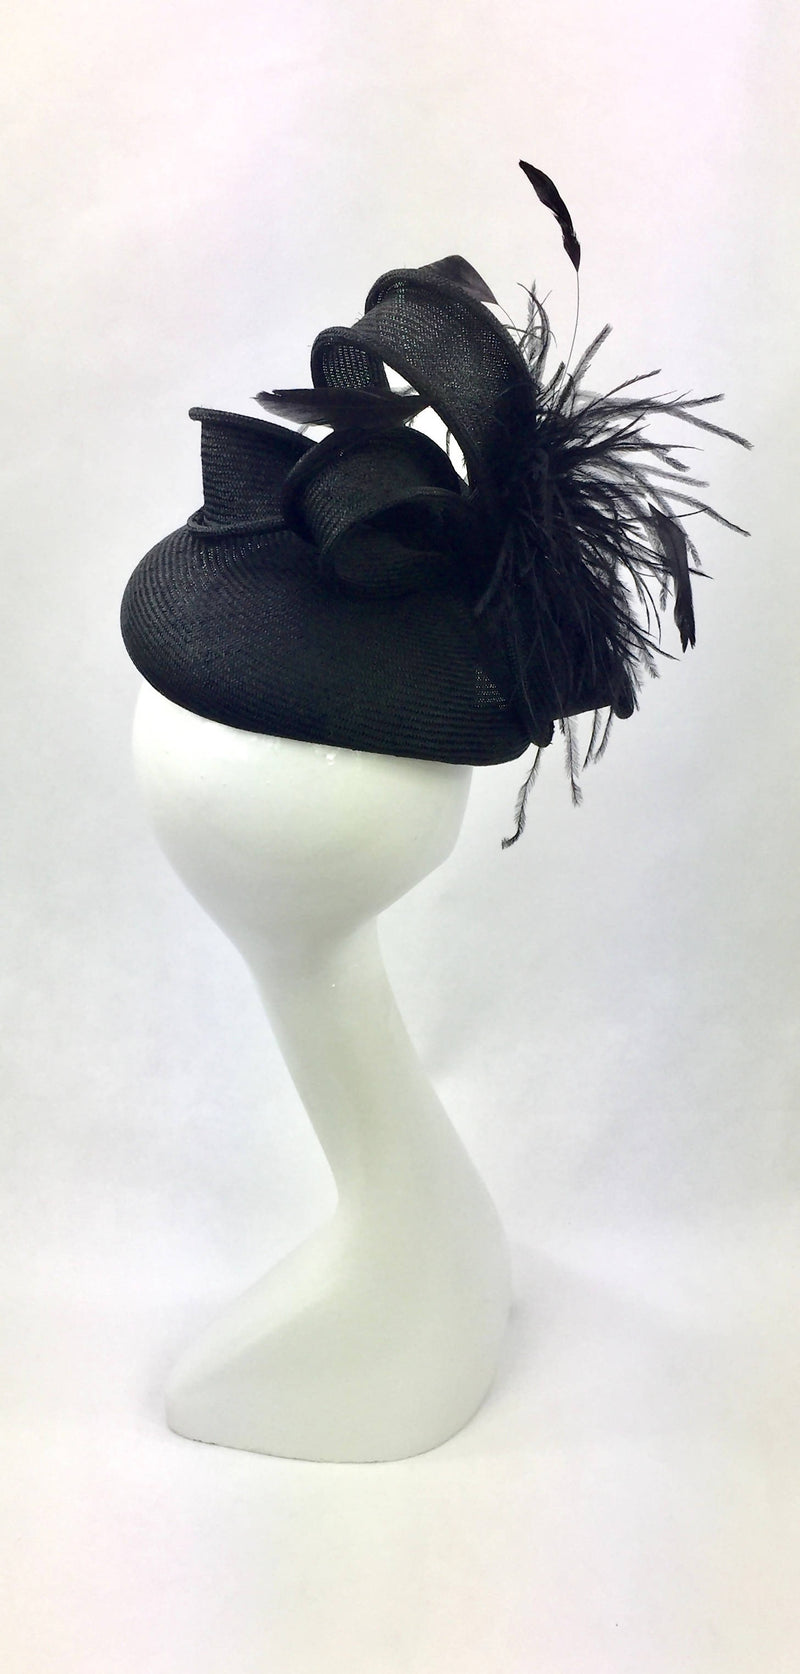 Black Parisisal Pillbox Hat with Bows and Feather Trim